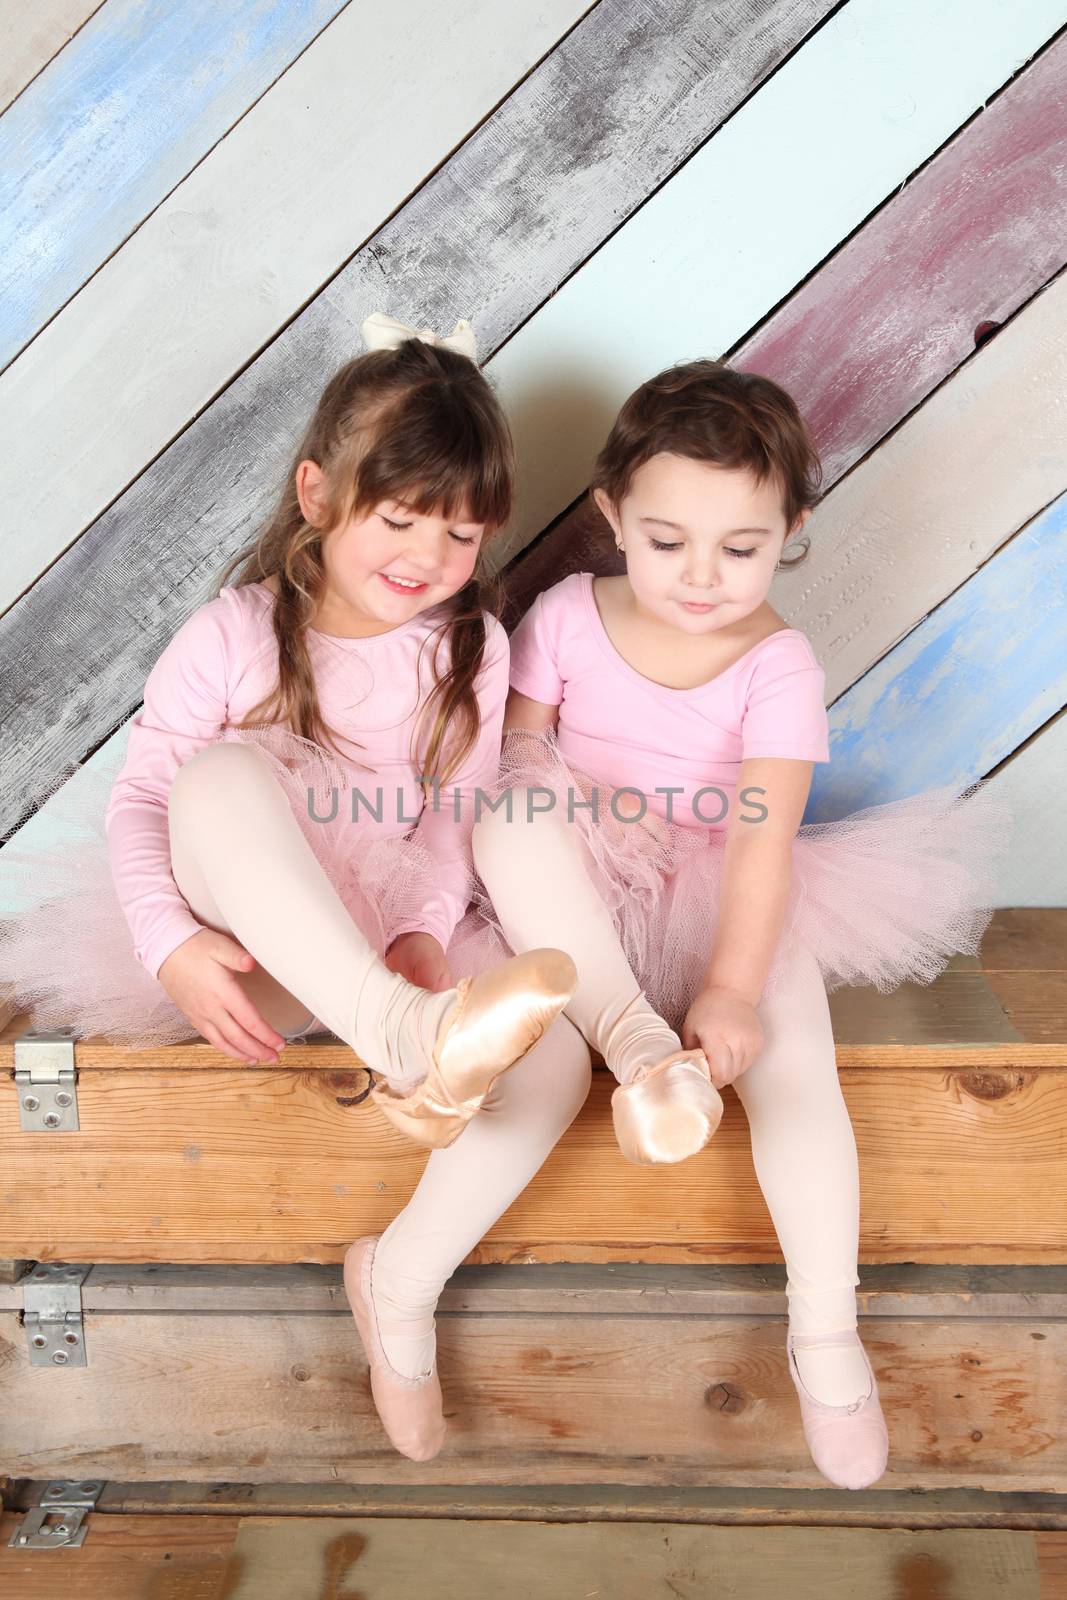 Friends playing dress-up in ballet costumes against colorful background